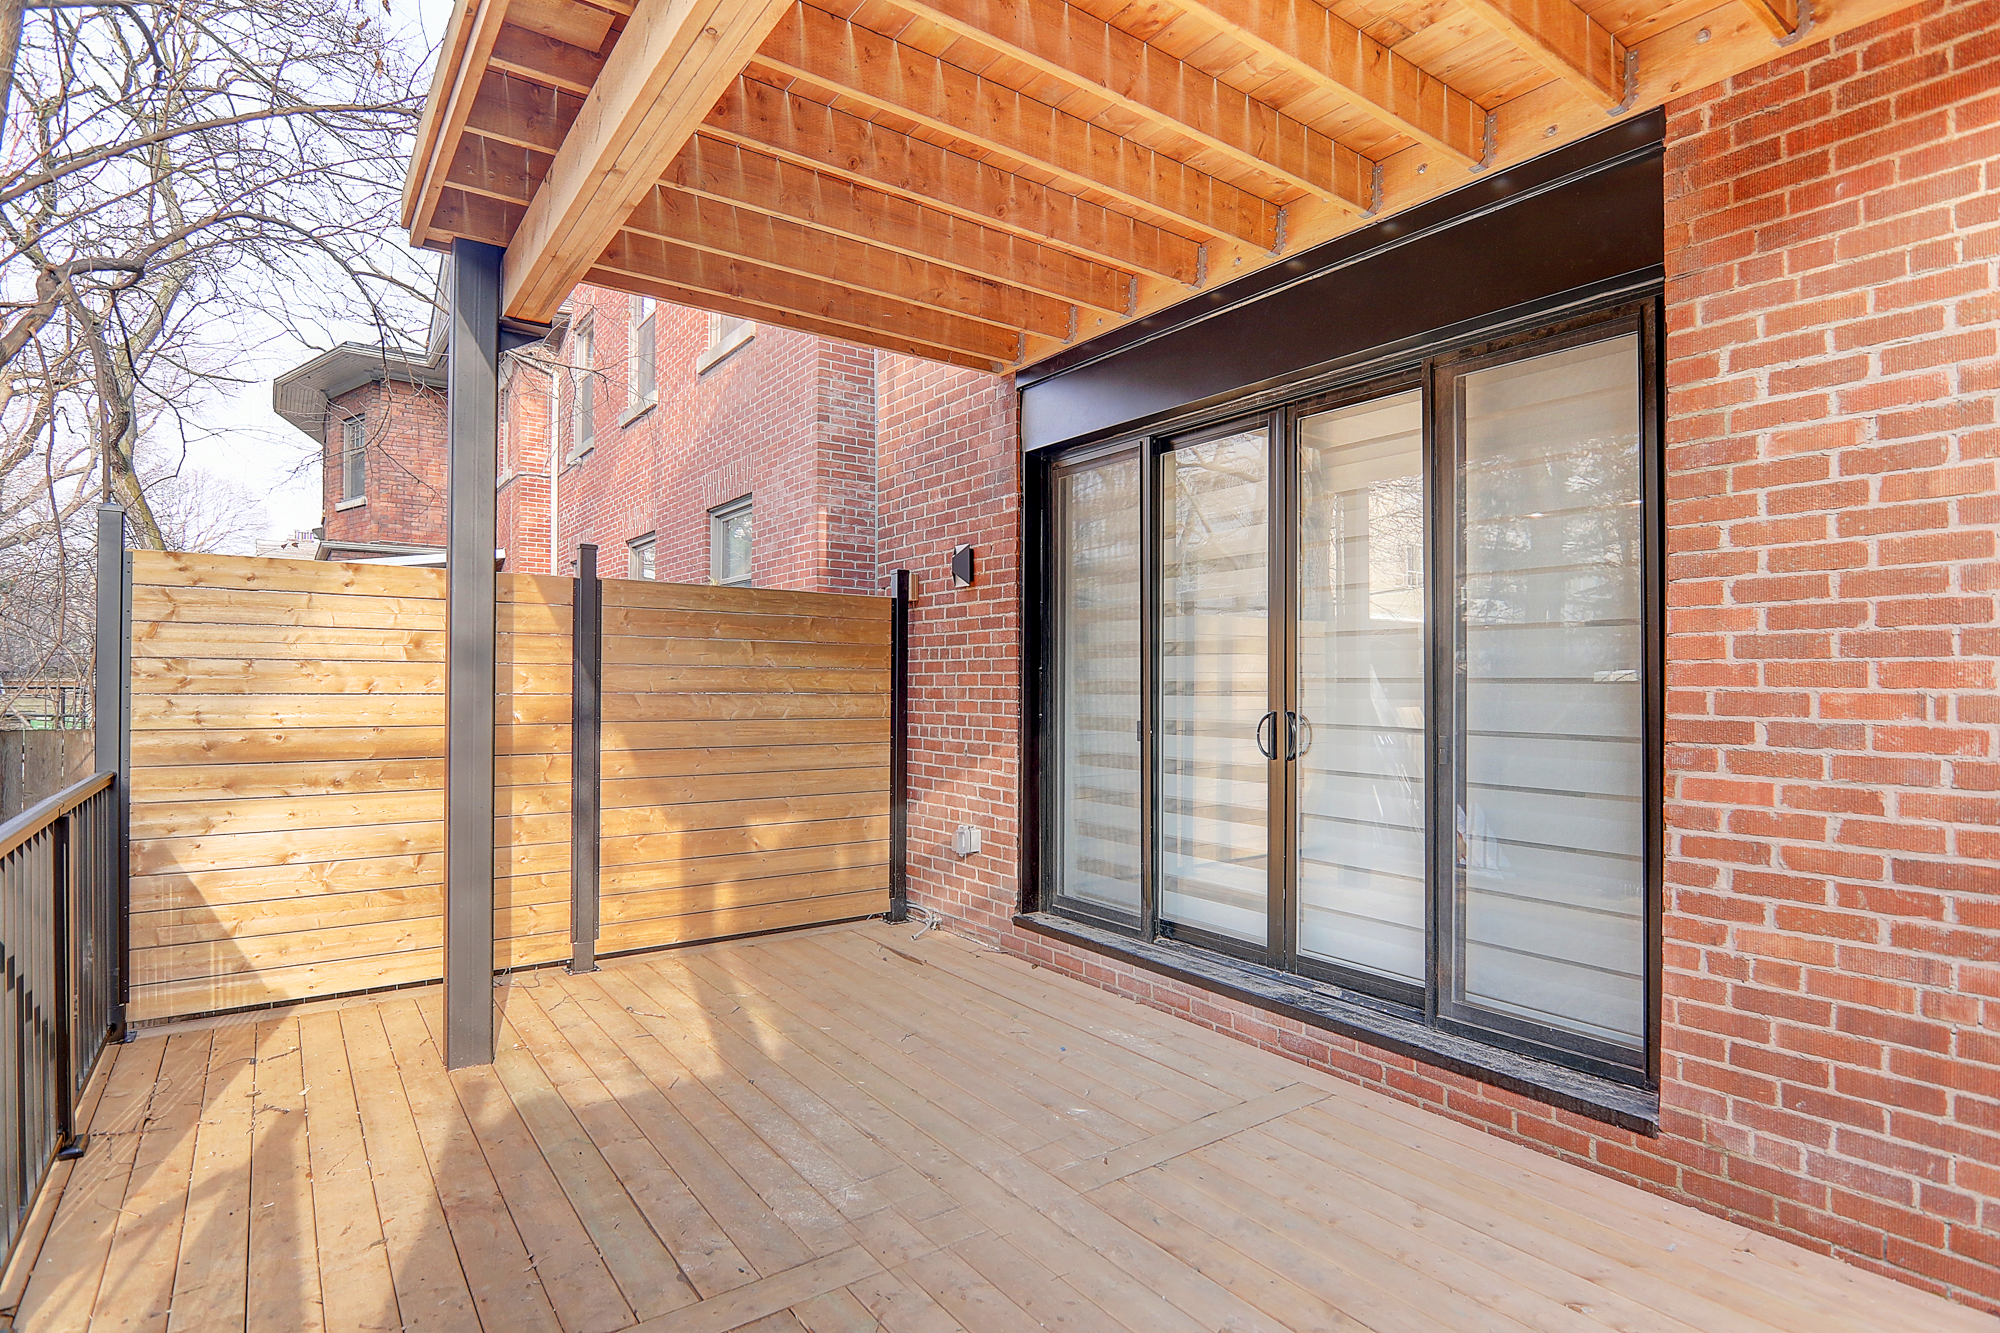 A patio with a wood deck and a wooden fence